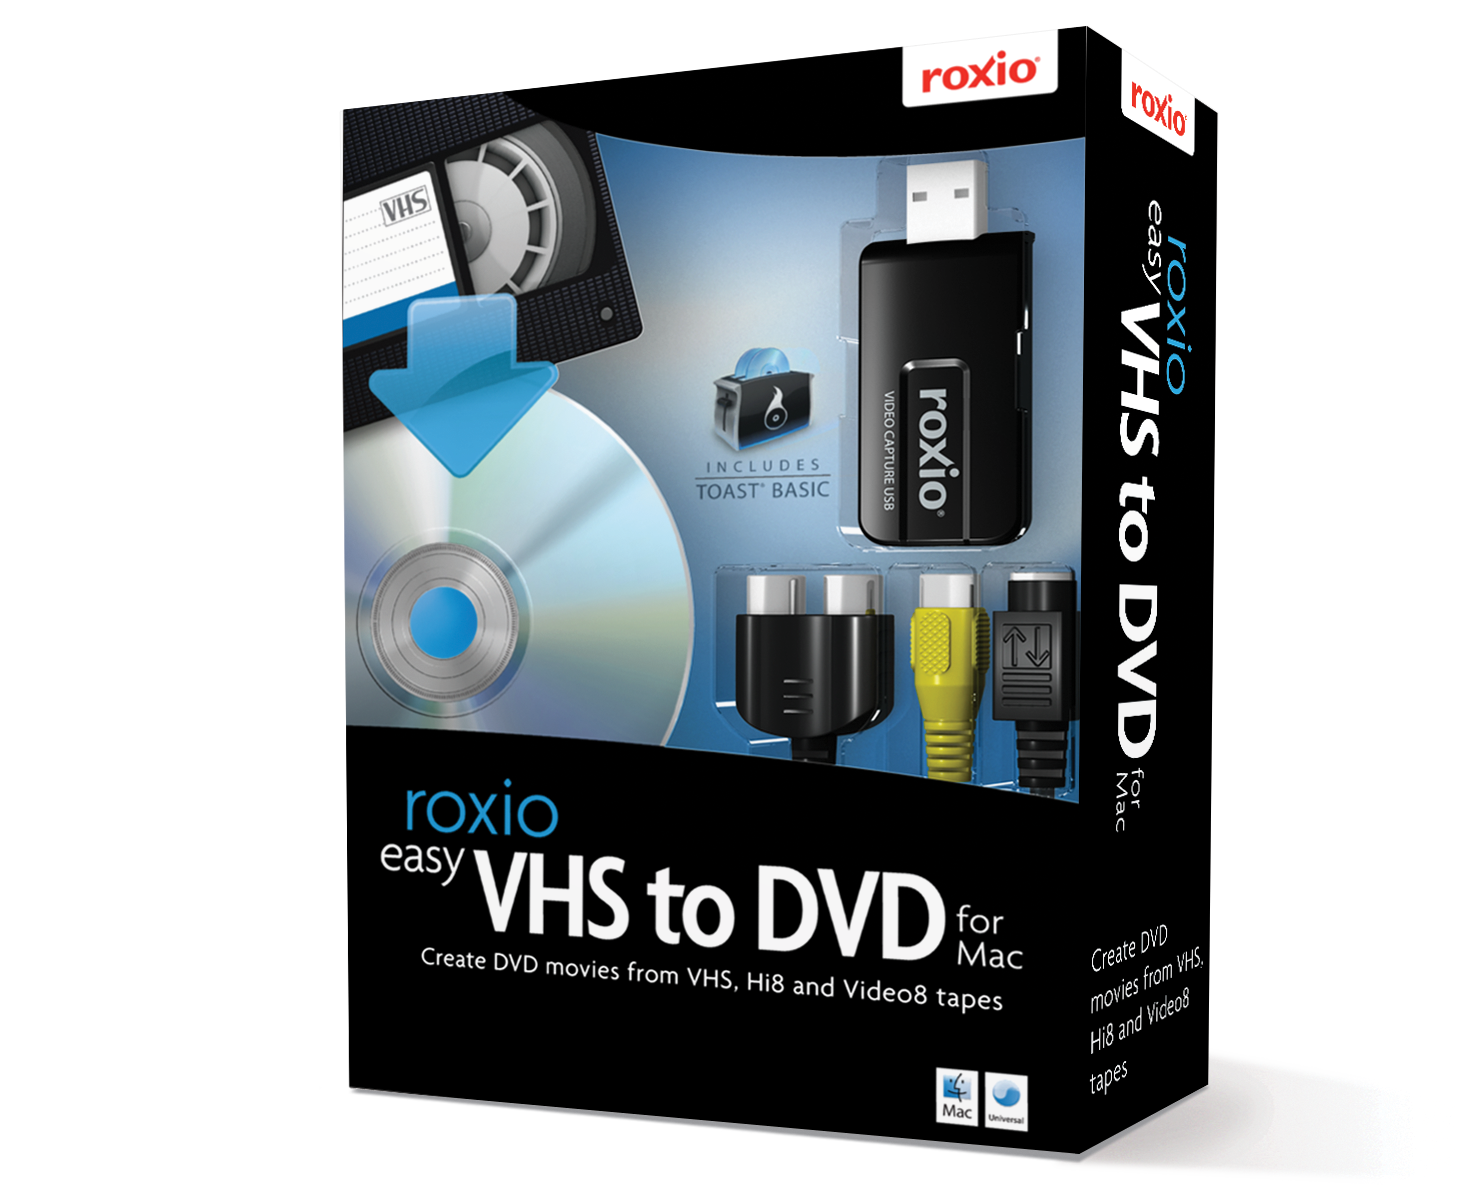 roxio easy vhs to dvd for mac